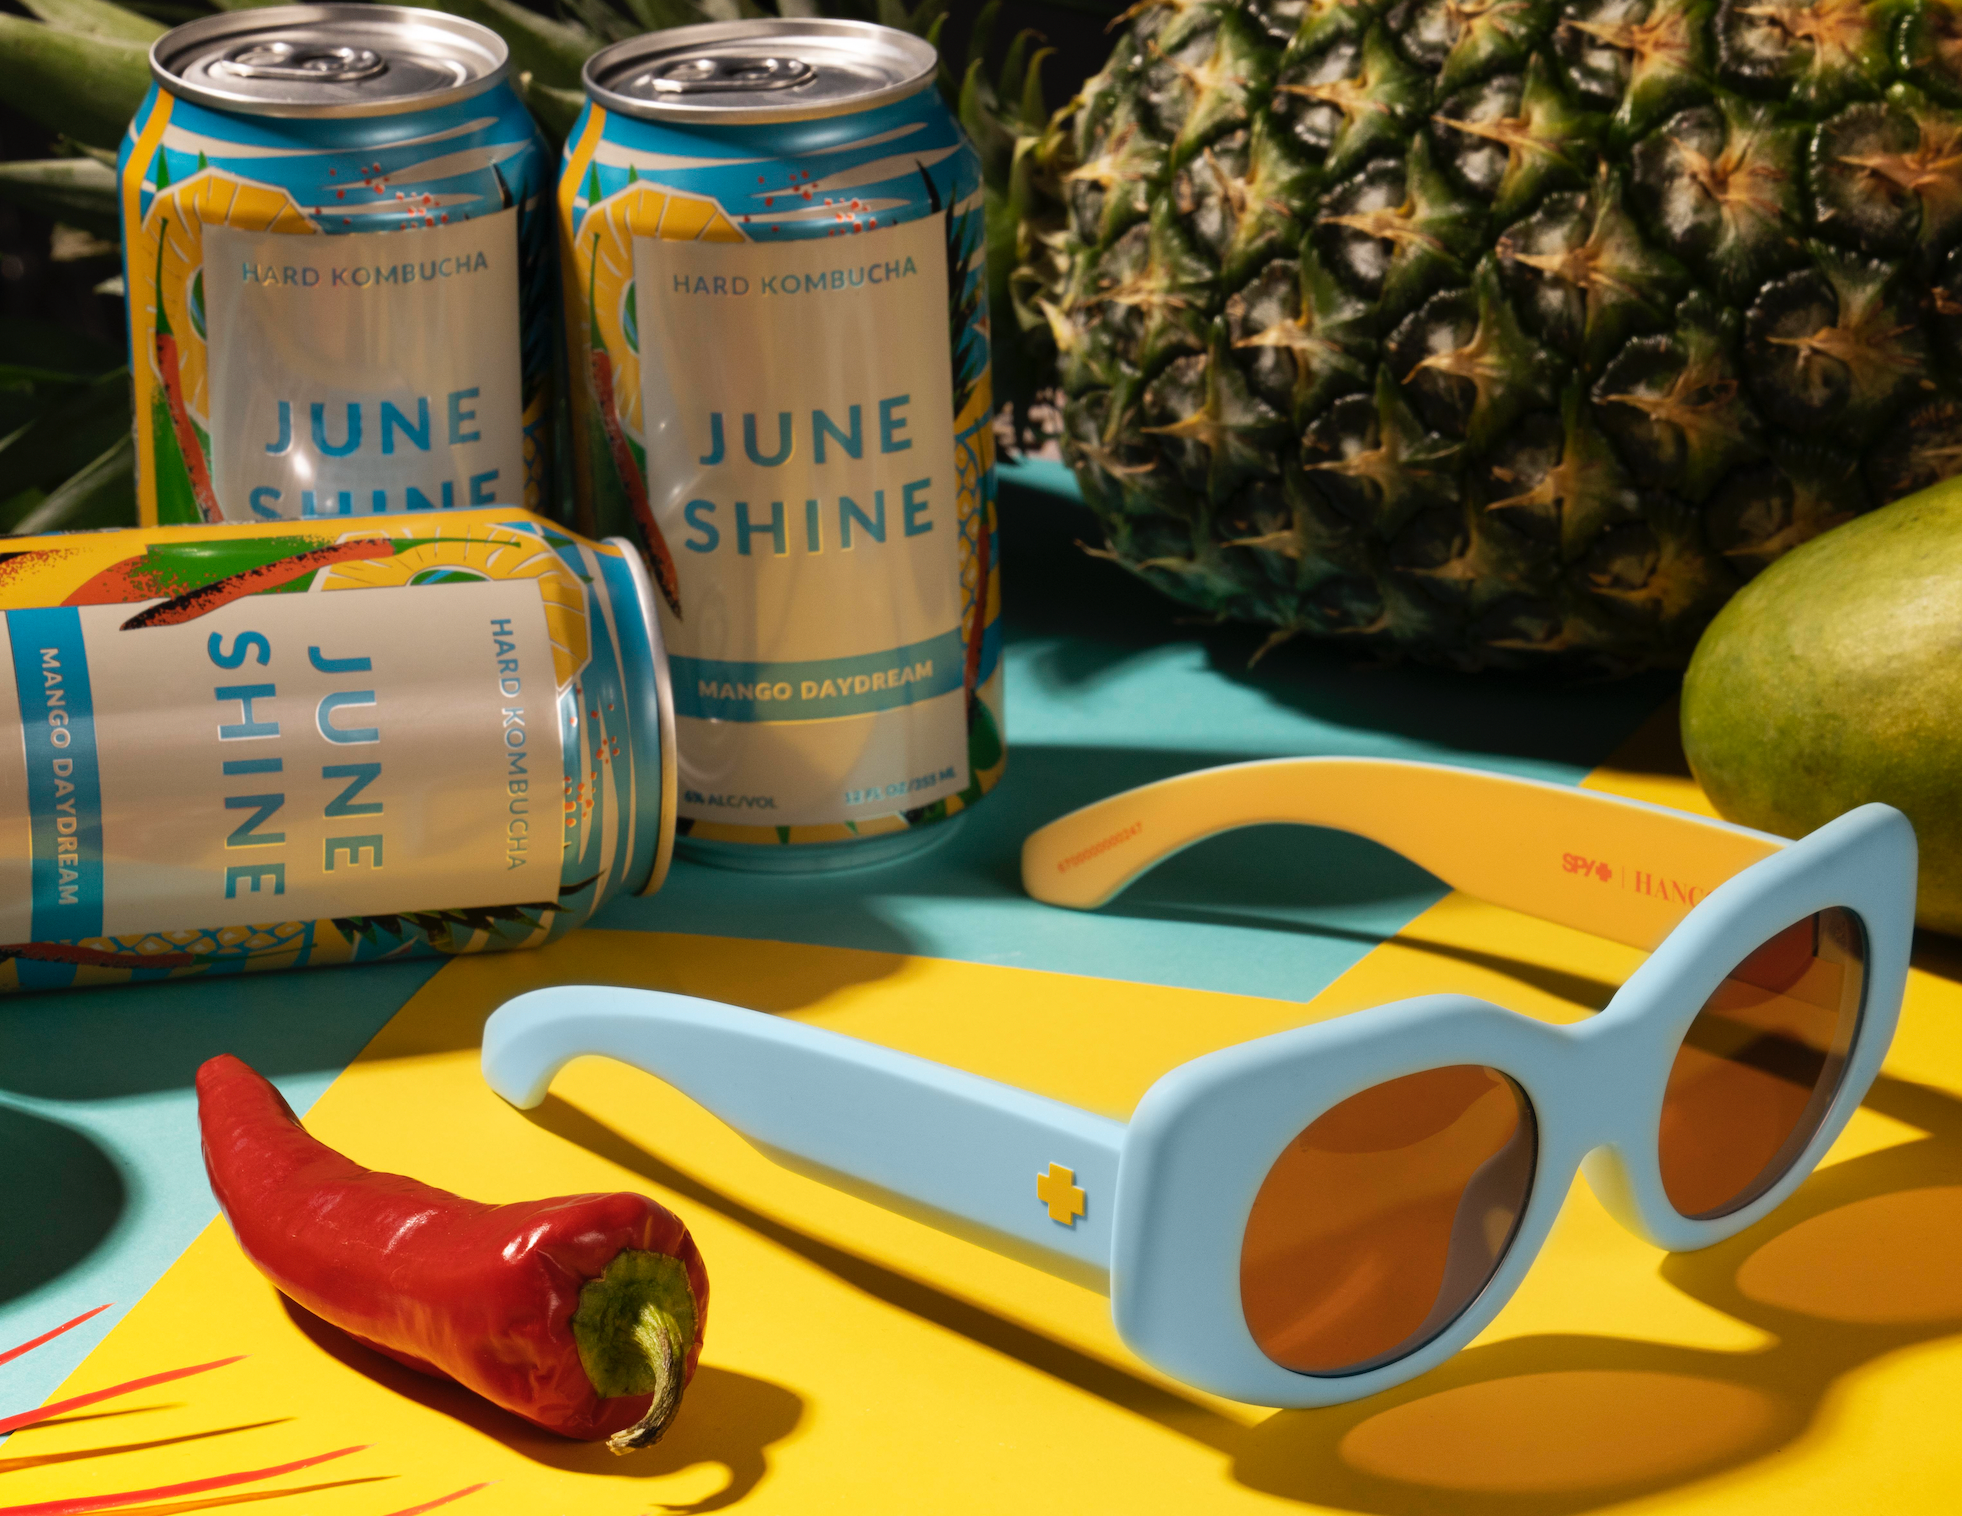 Spy x Juneshine light blue sunglasses against mango daydream cans and pineapple